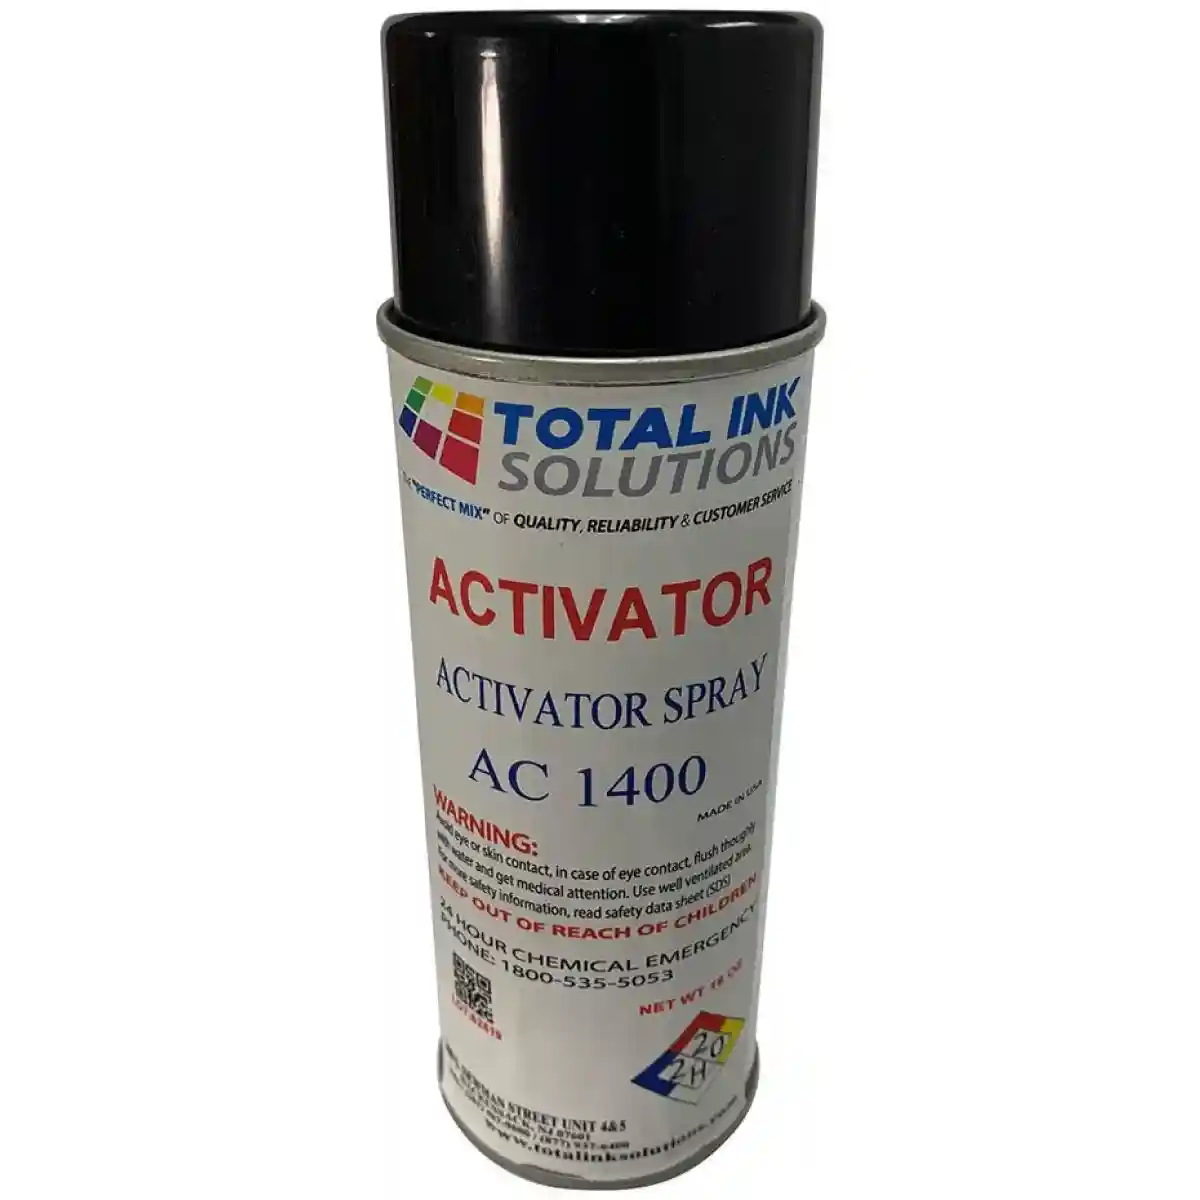 Adhsive Activator 1400 TOTAL INK SOLUTIONS®